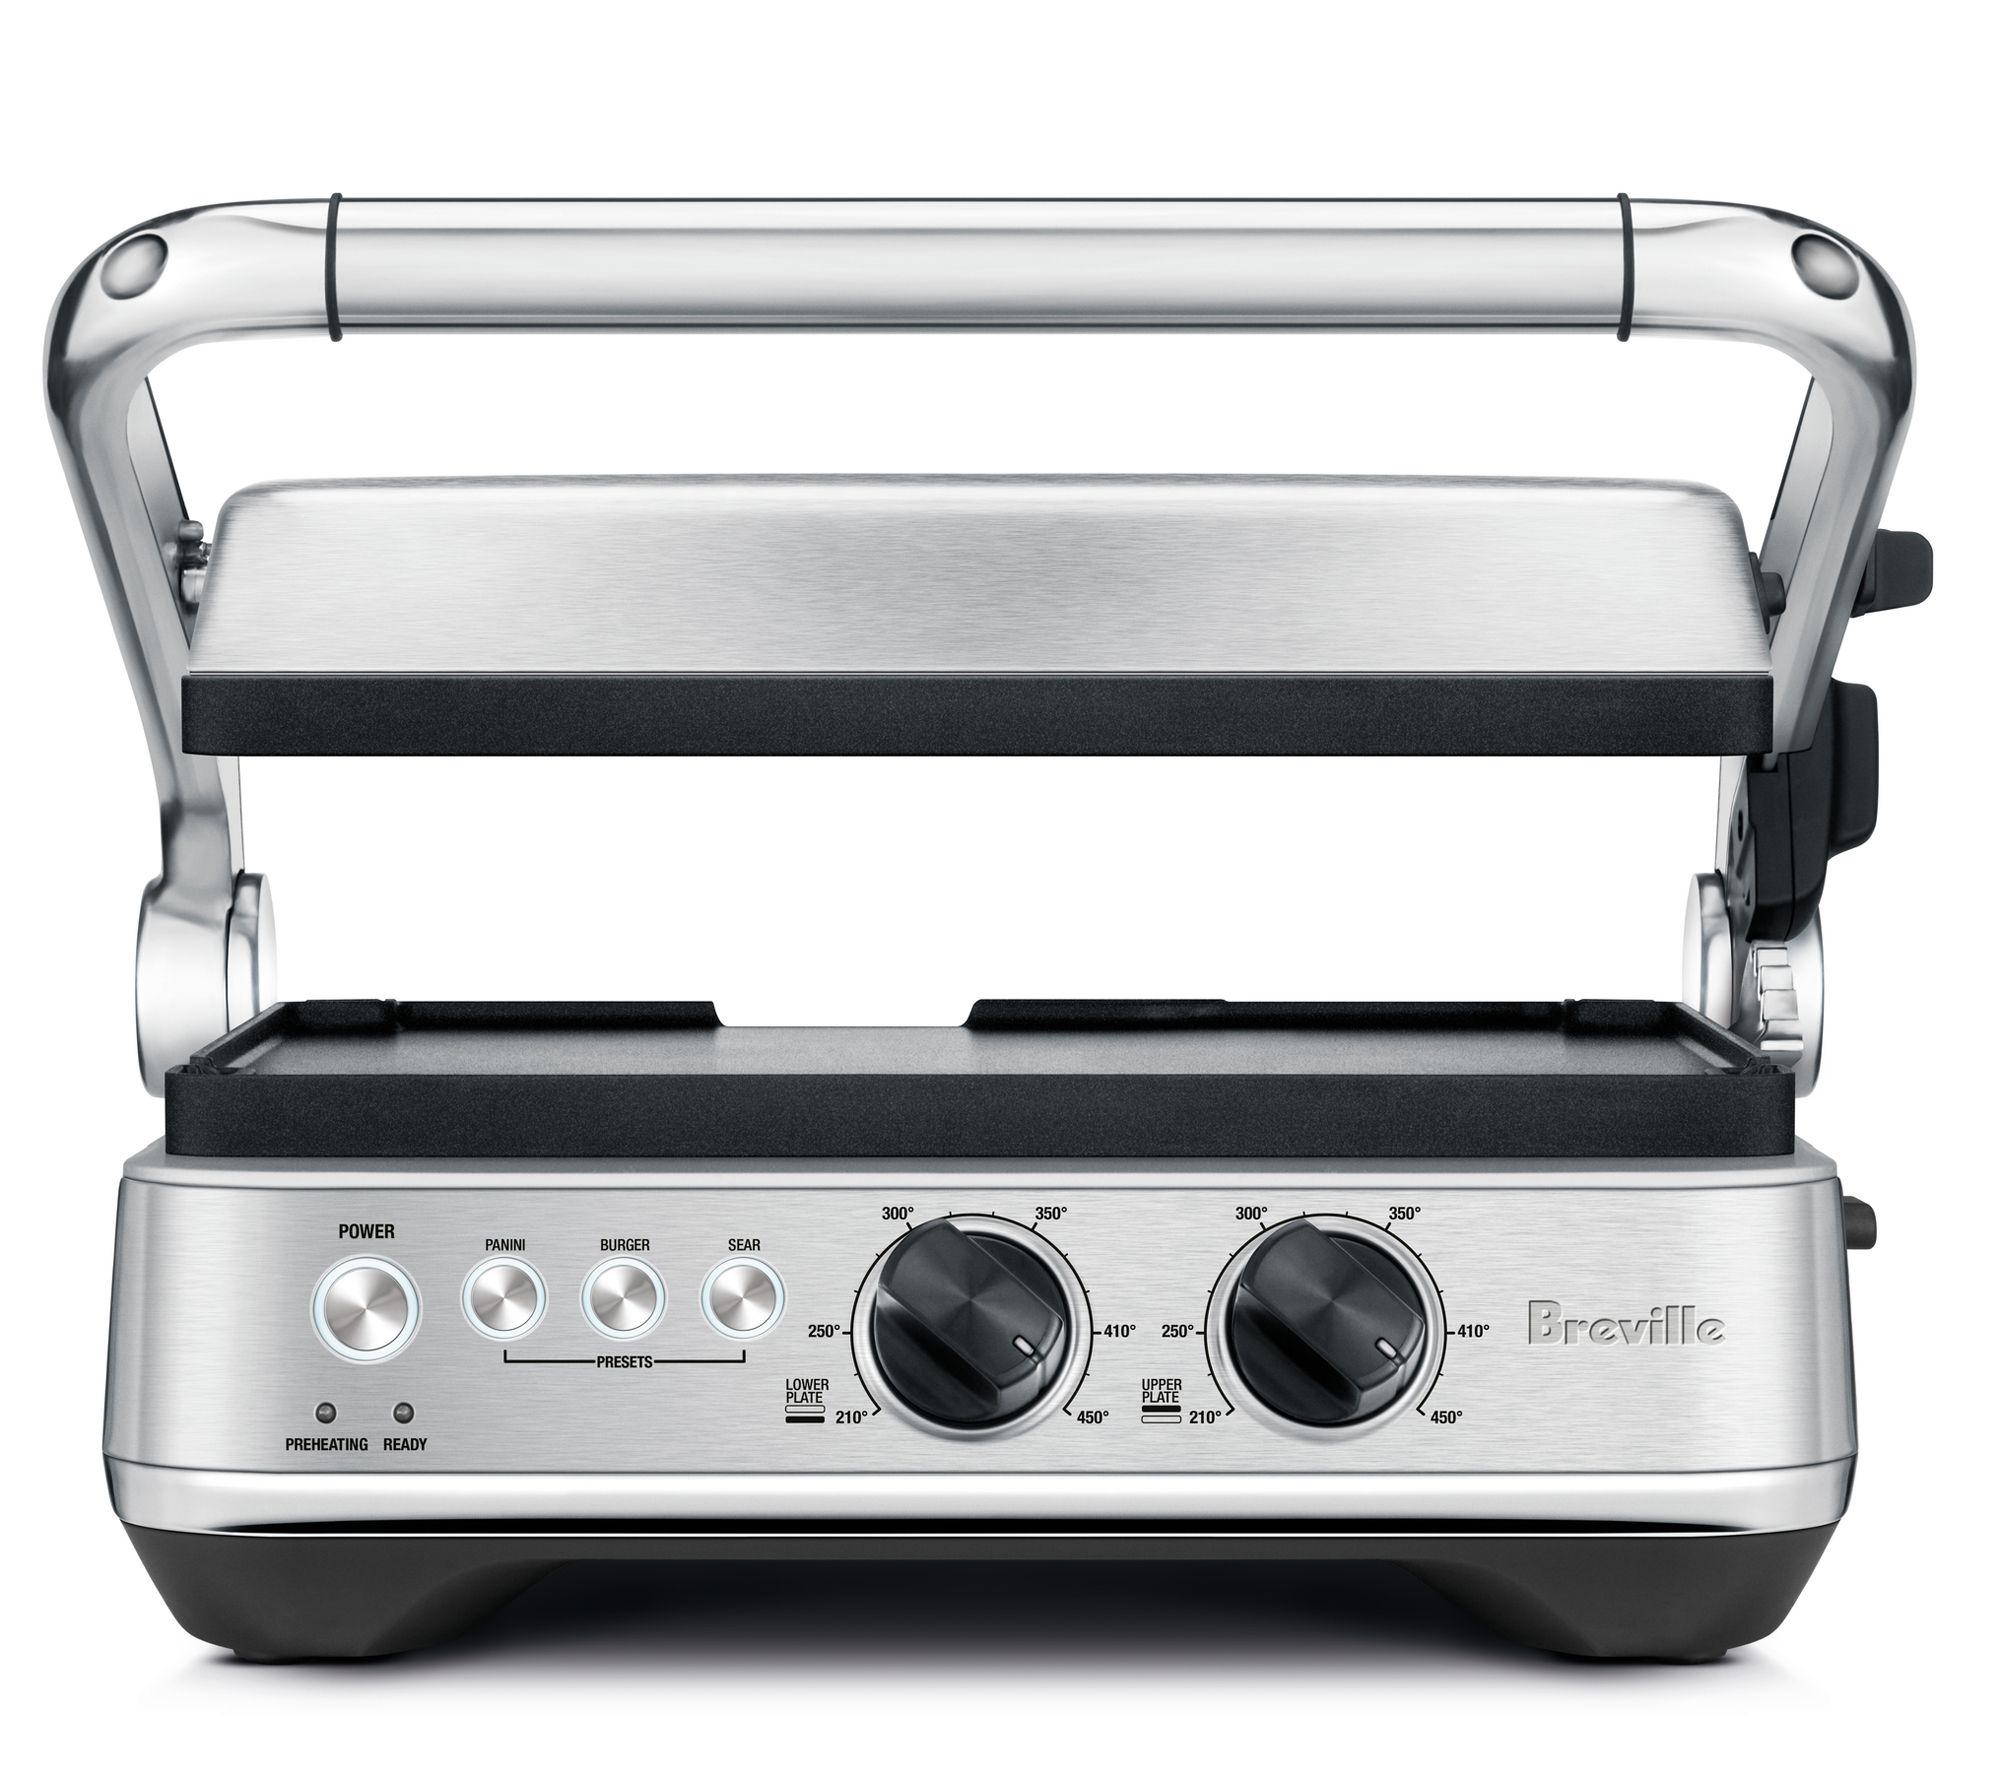 Breville Smart Grill - Review